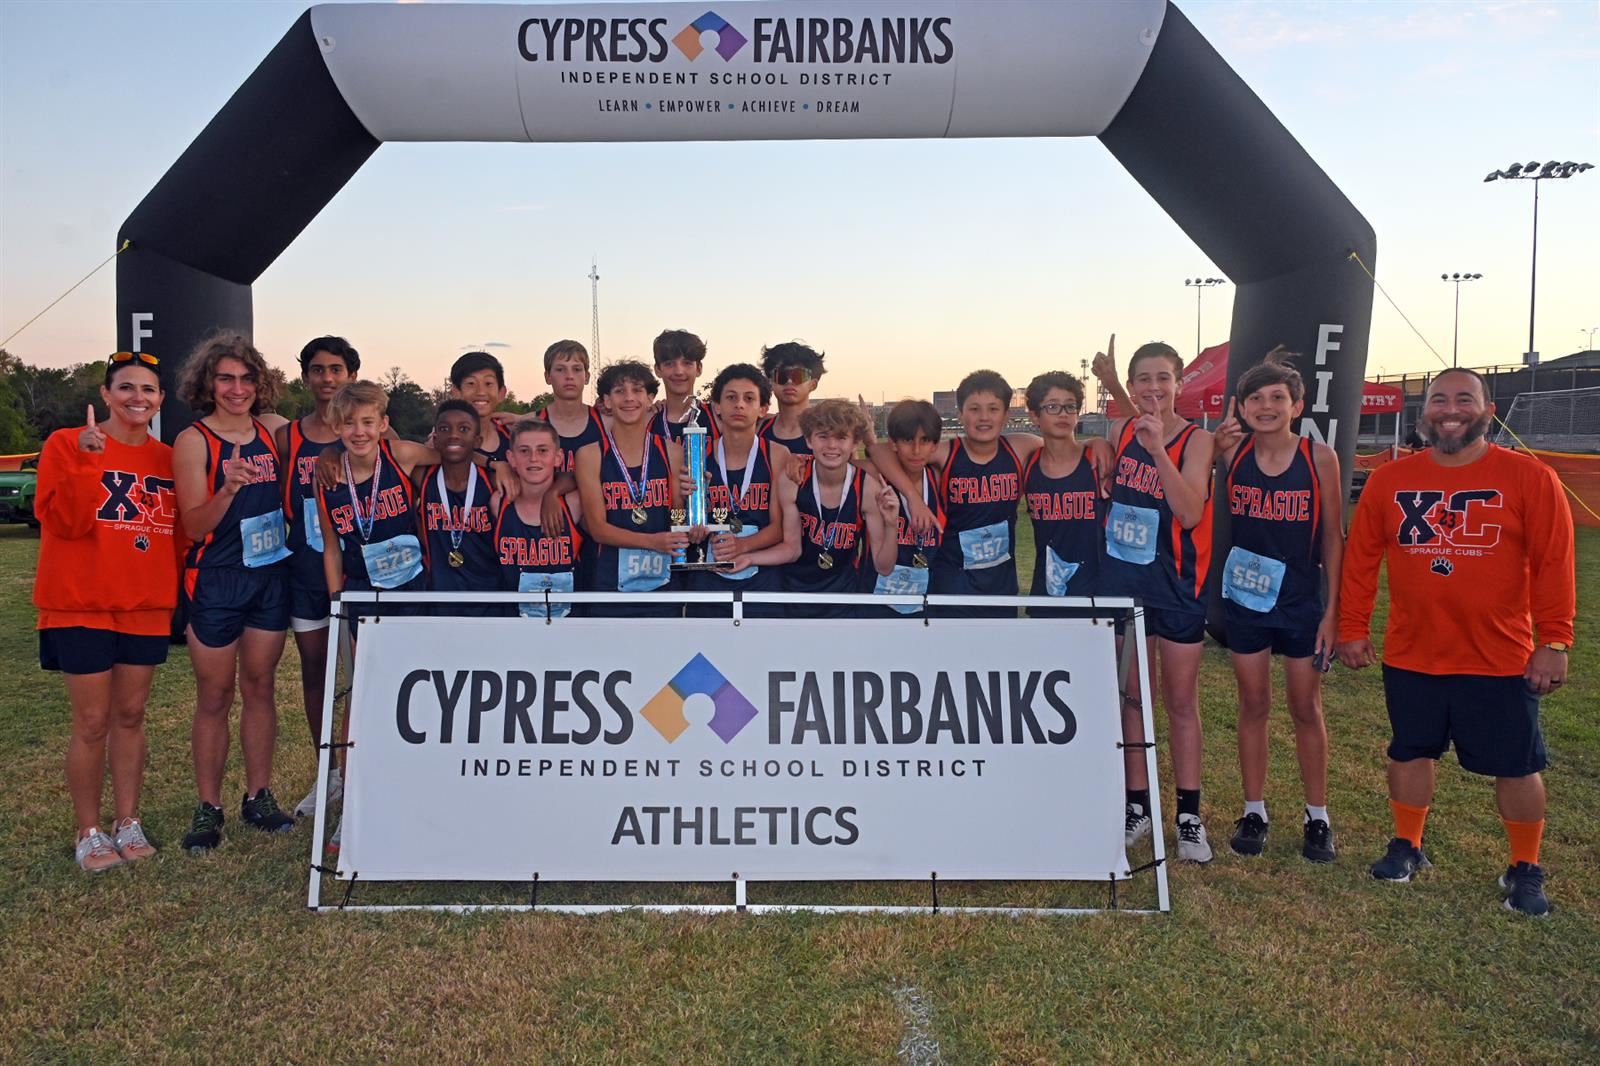 Smith Middle School won the eighth grade boys’ cross country team title with 39 points.